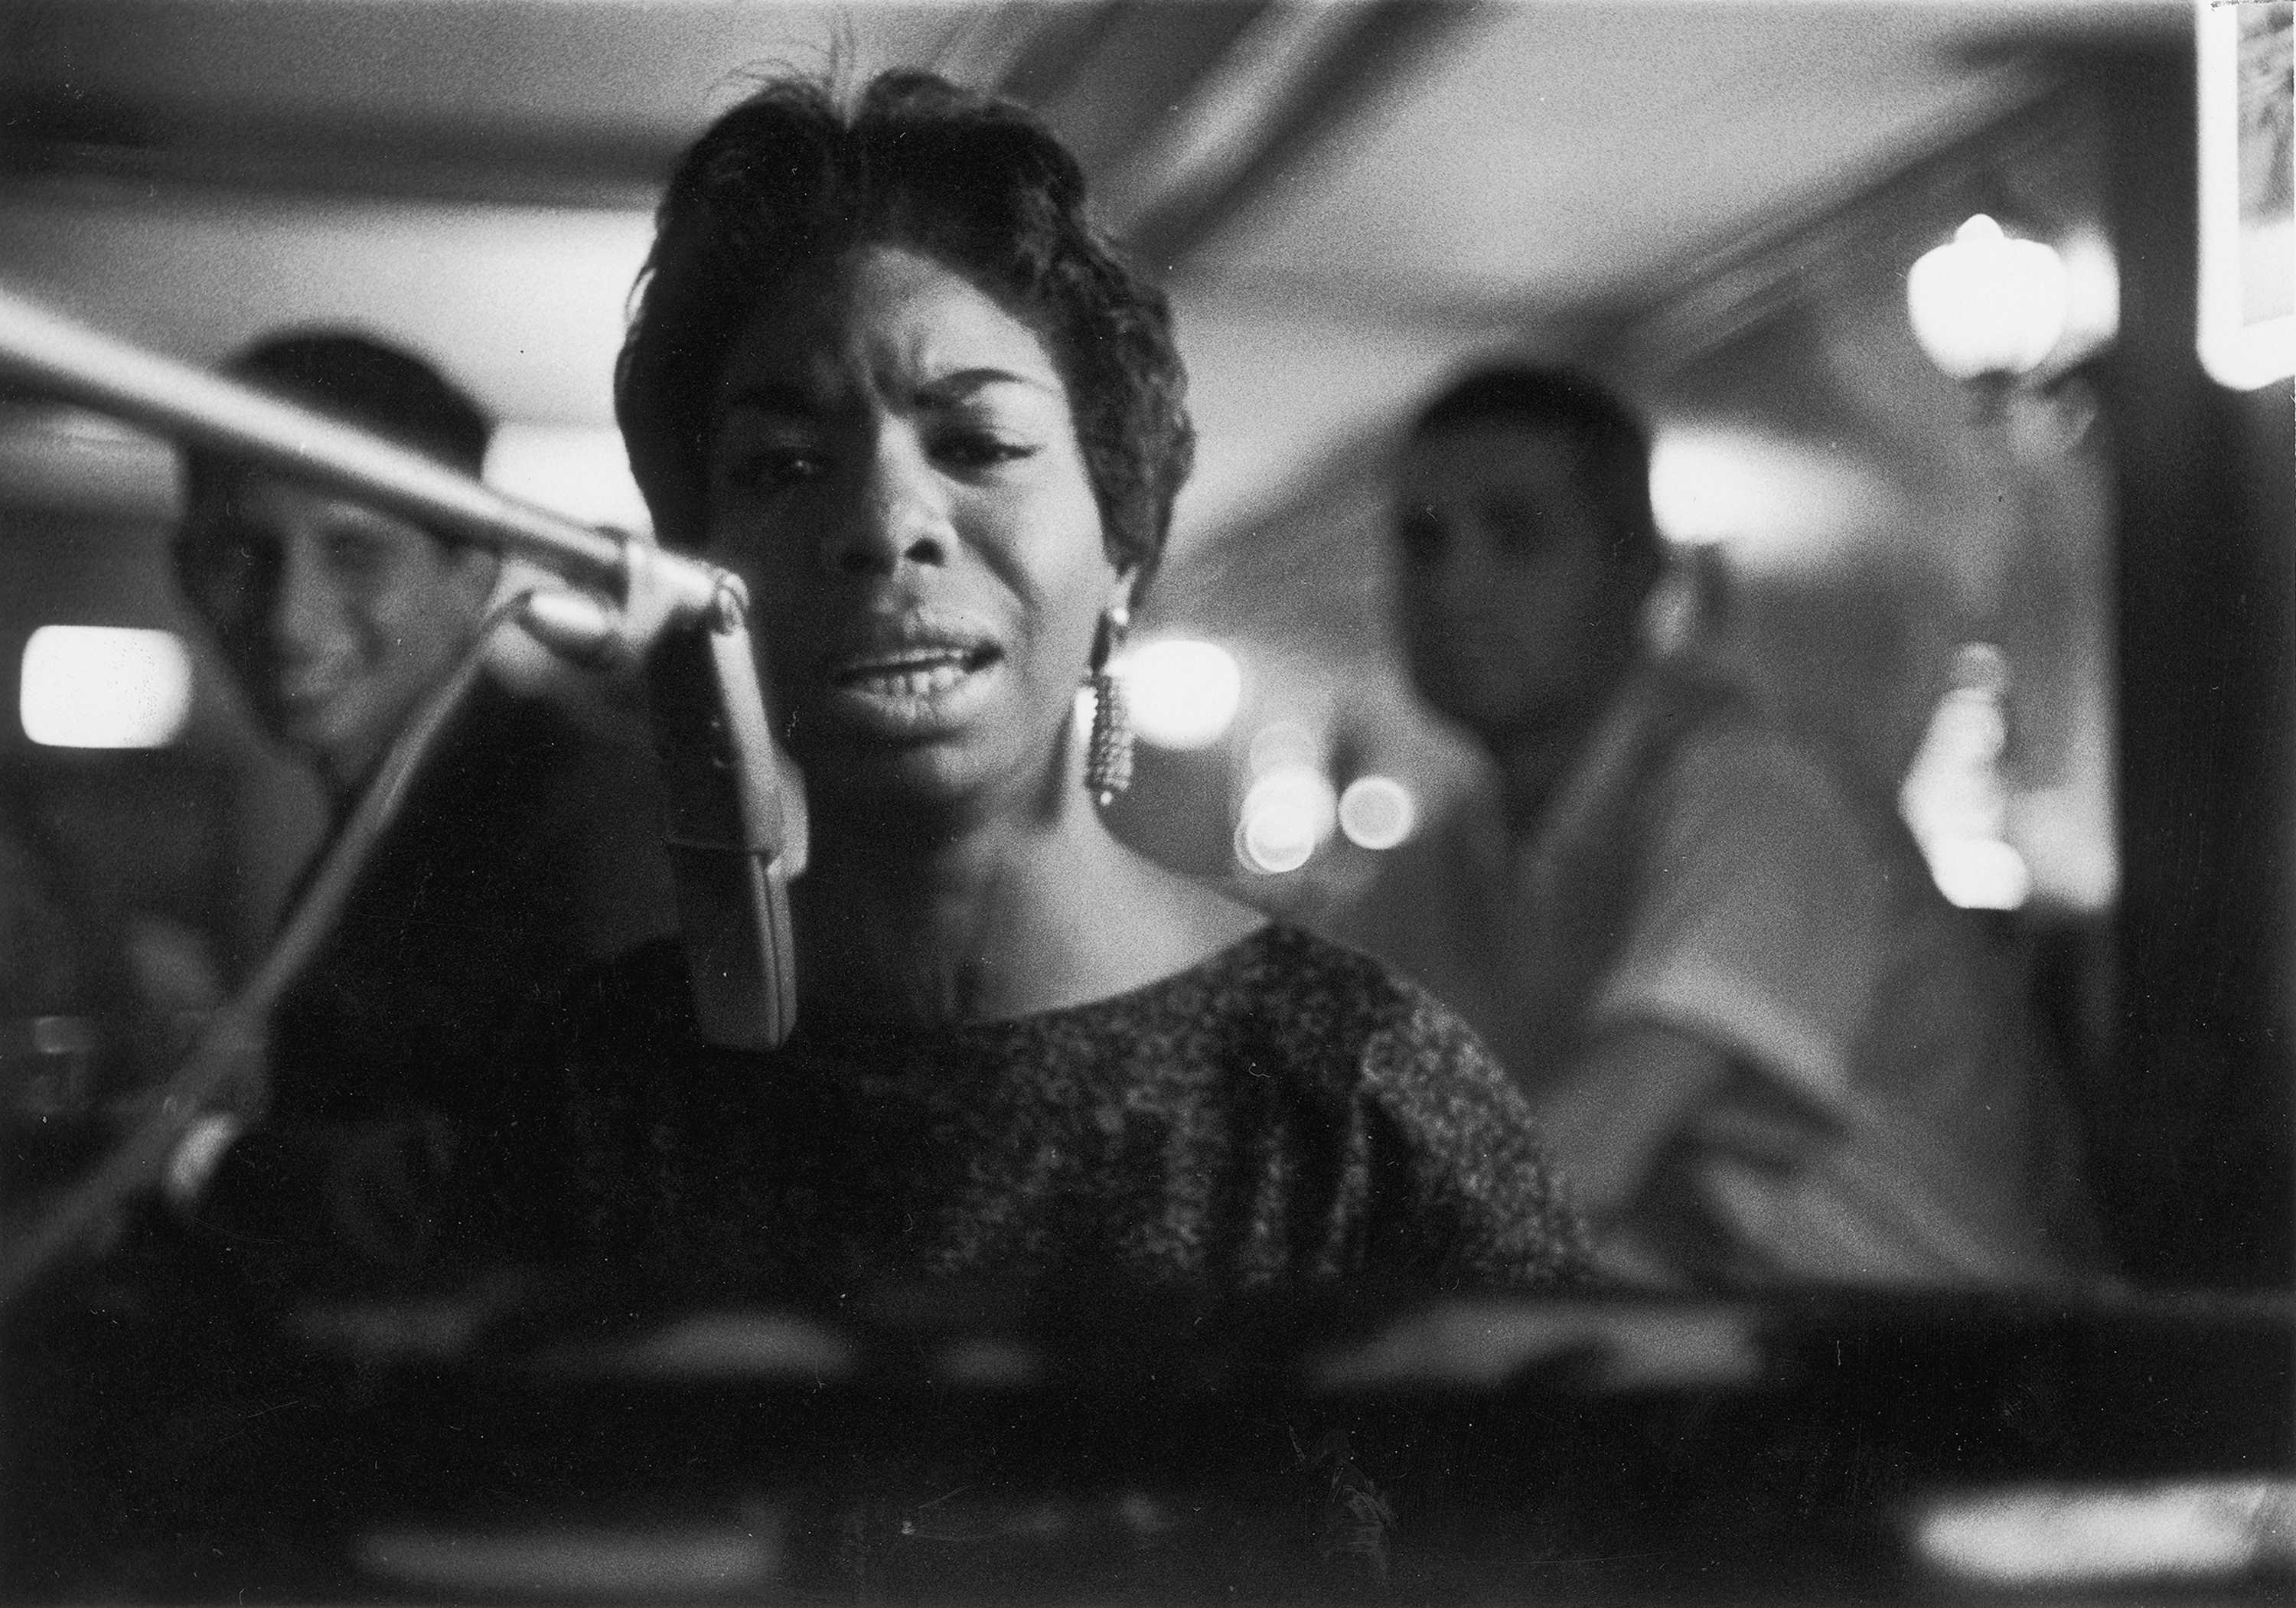 Close up photograph of Nina Simone singing in black and white